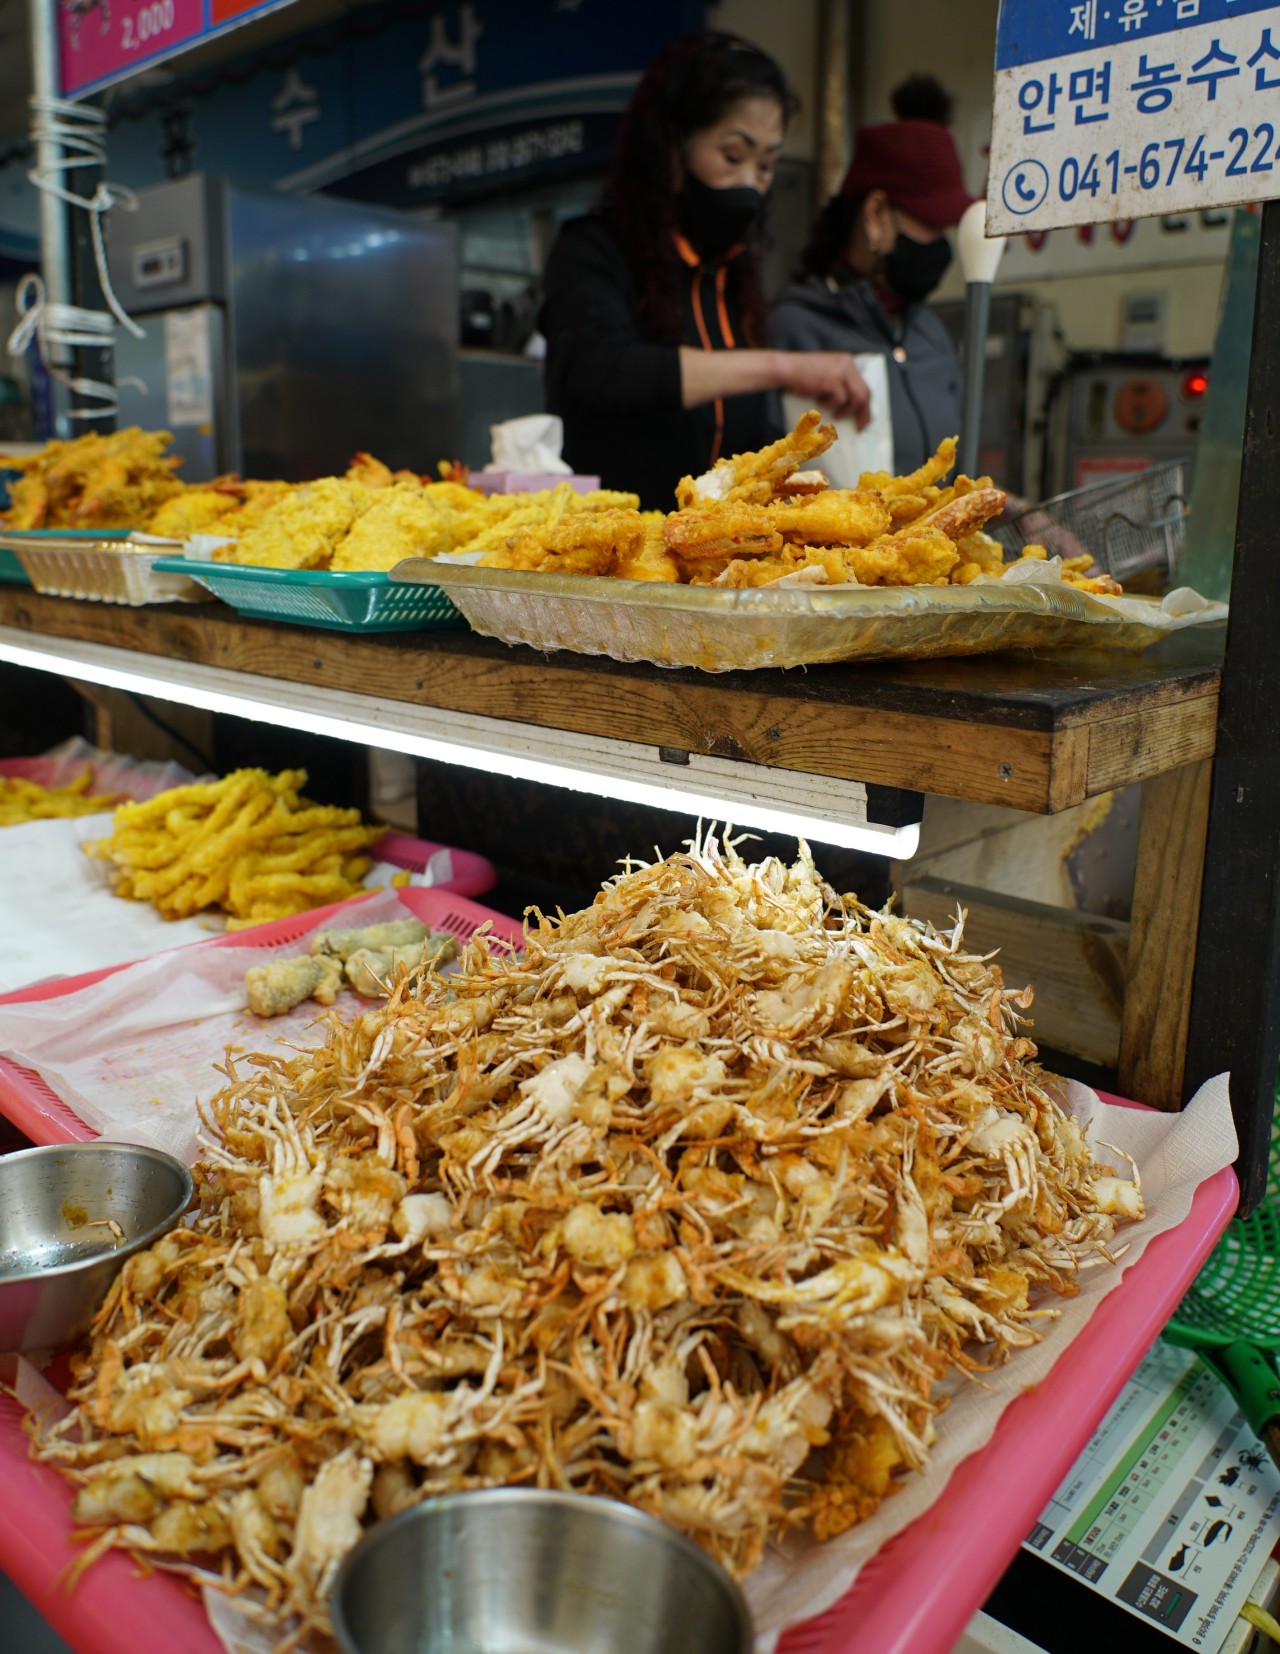 Traditional Taean County dish gegukji and fried crabs are sold at the Anmyeondo Island Fish Market in Taean County, South Chungcheong Province. (The Korea Herald)